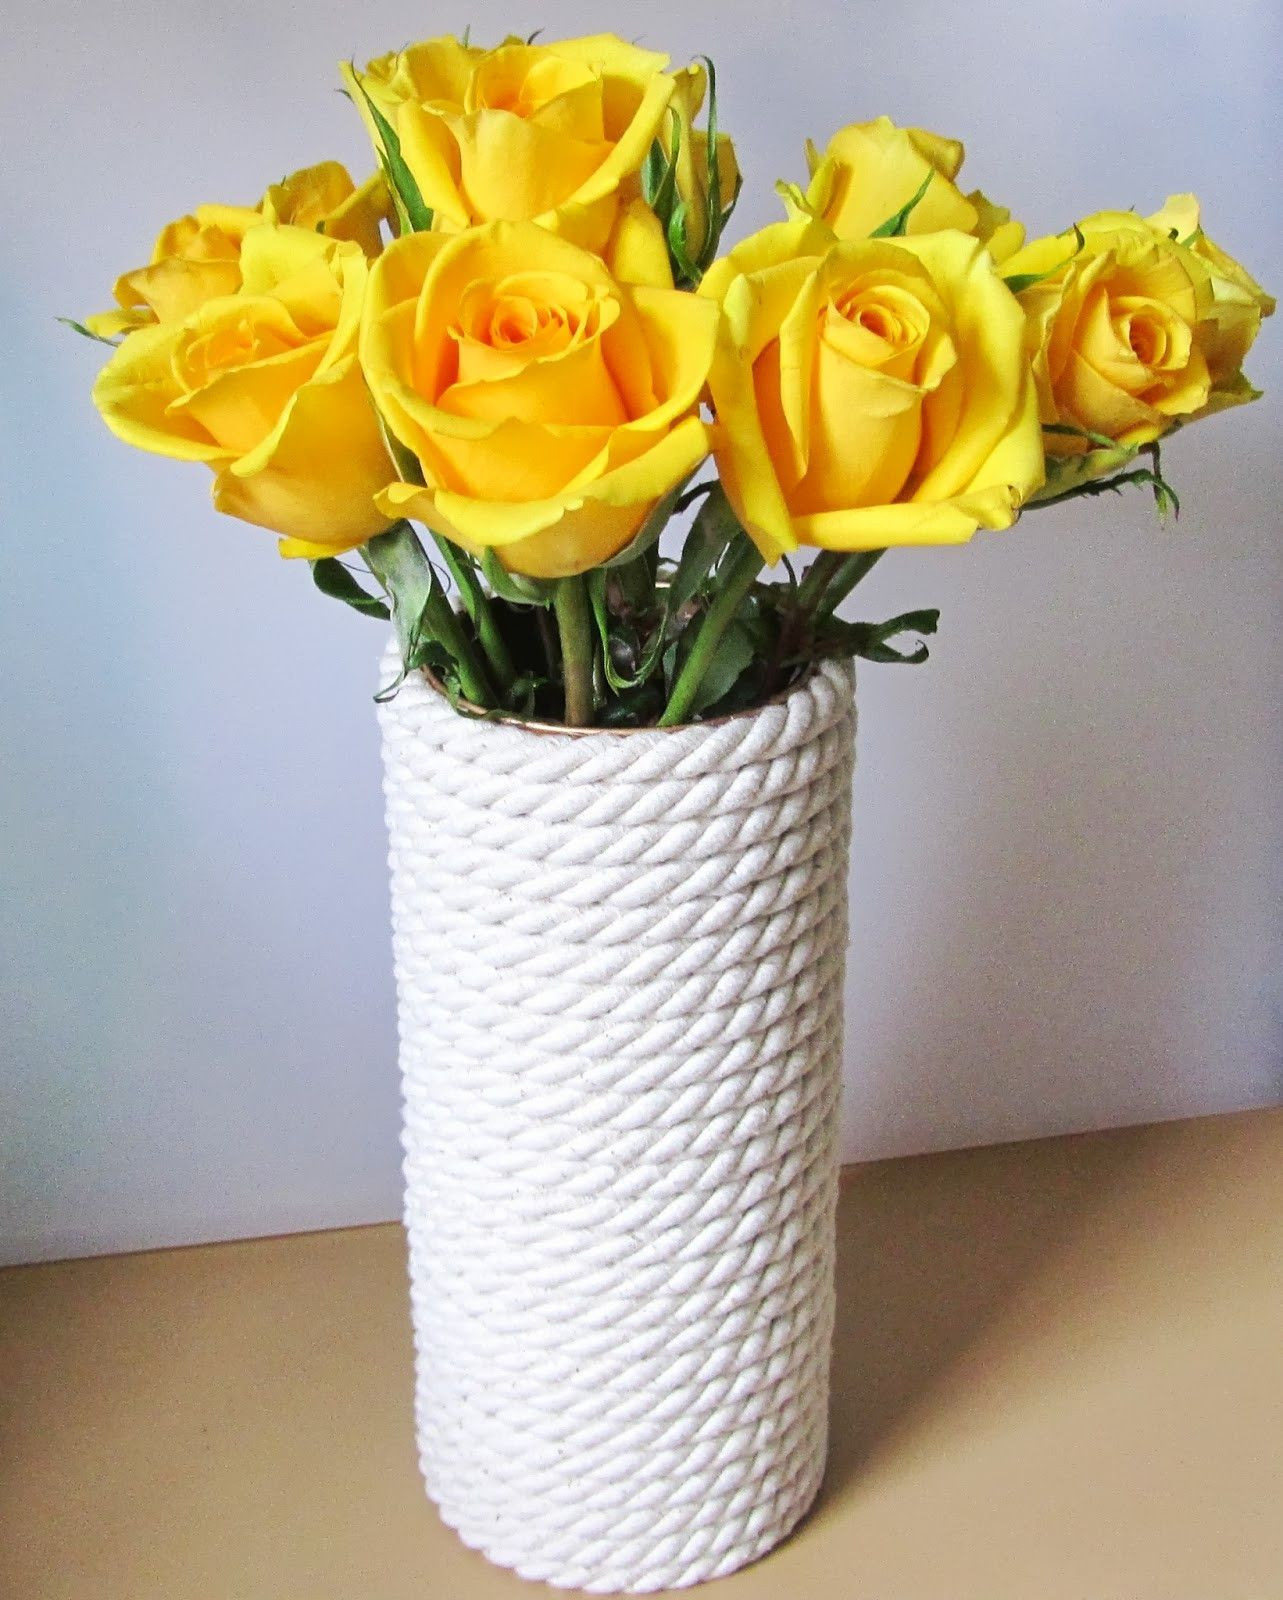 11 Unique Pictures Of Yellow Roses In A Vase 2024 free download pictures of yellow roses in a vase of 31 how to keep roses alive in a vase the weekly world with regard to nautical centerpieceh vases vase savei 0d for flowers uk filler